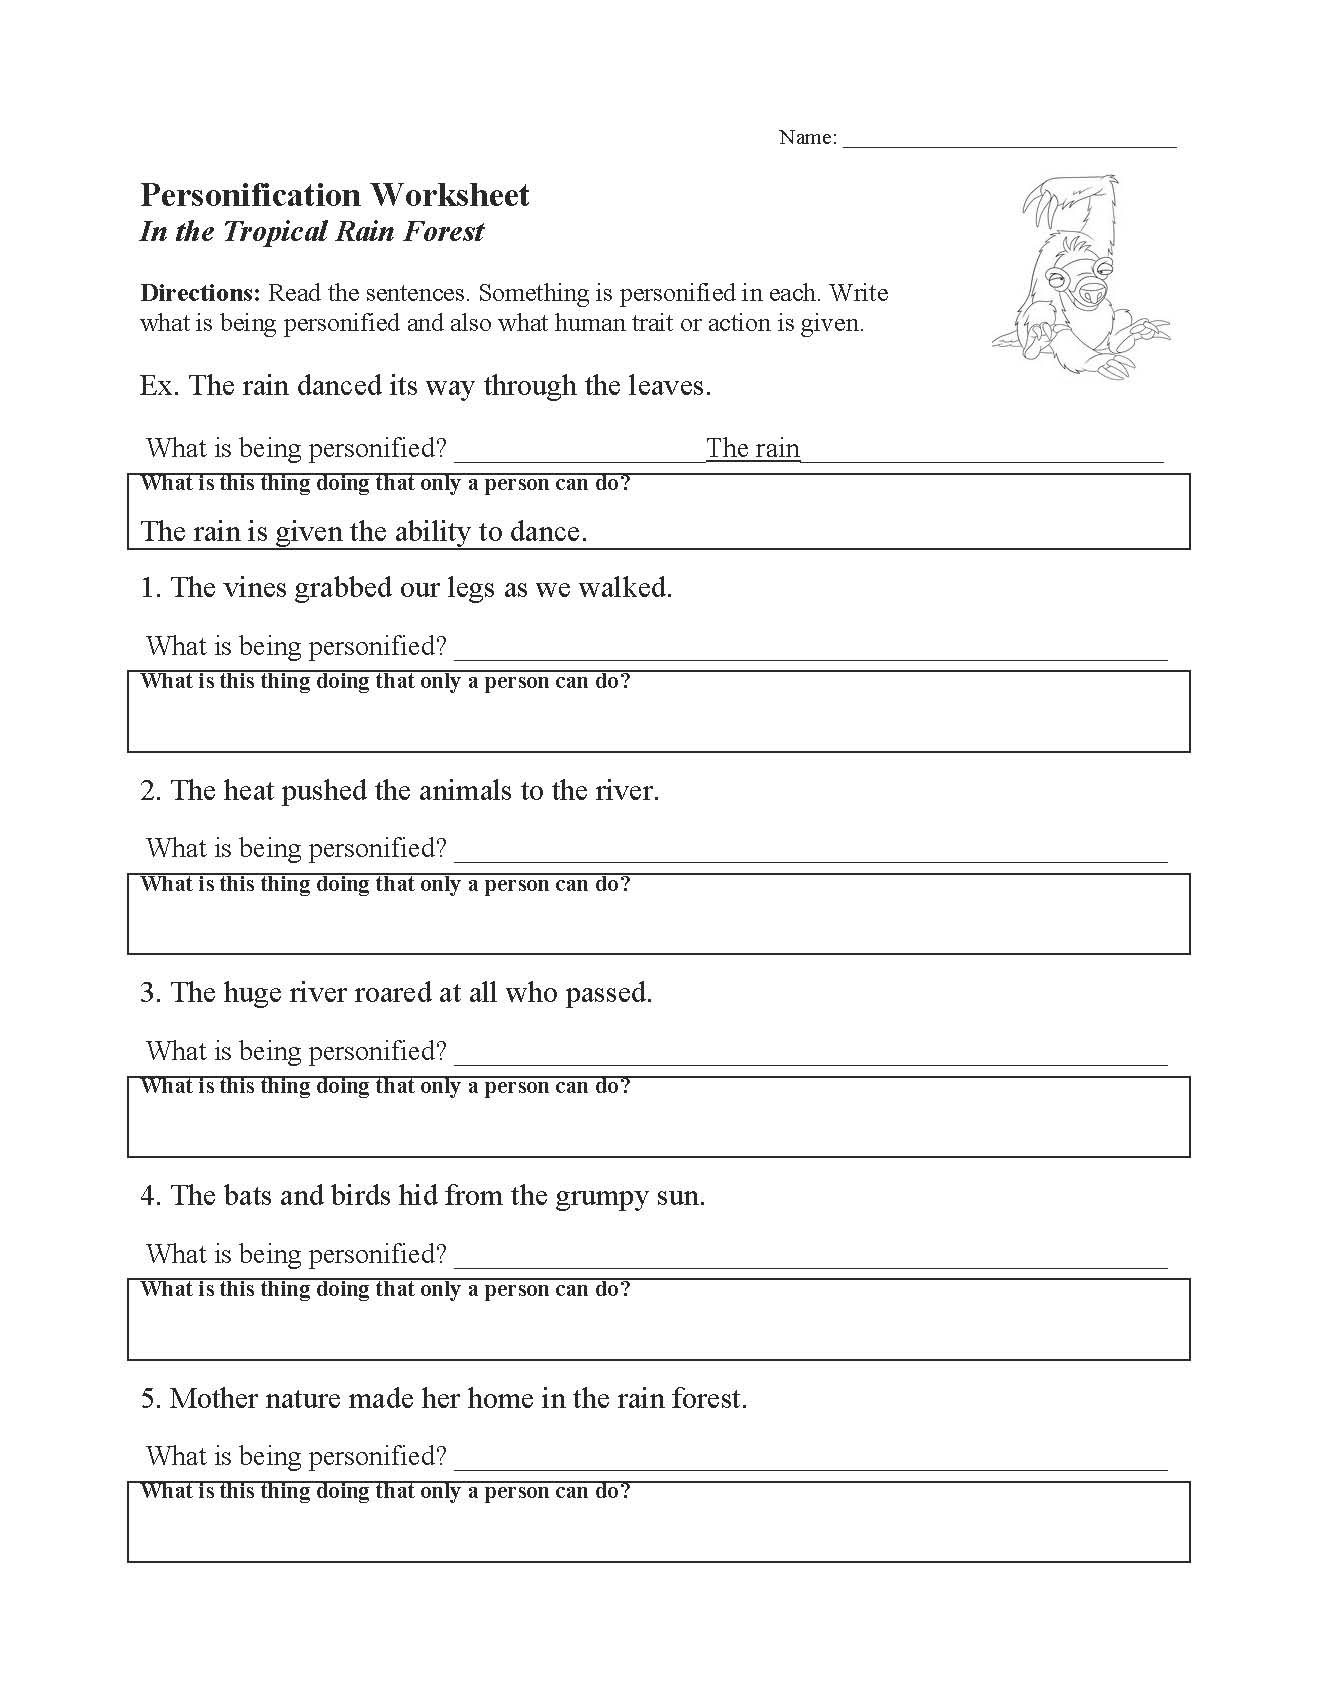 This is a preview image of our Personification Worksheet. Click on it to enlarge or view the source file.